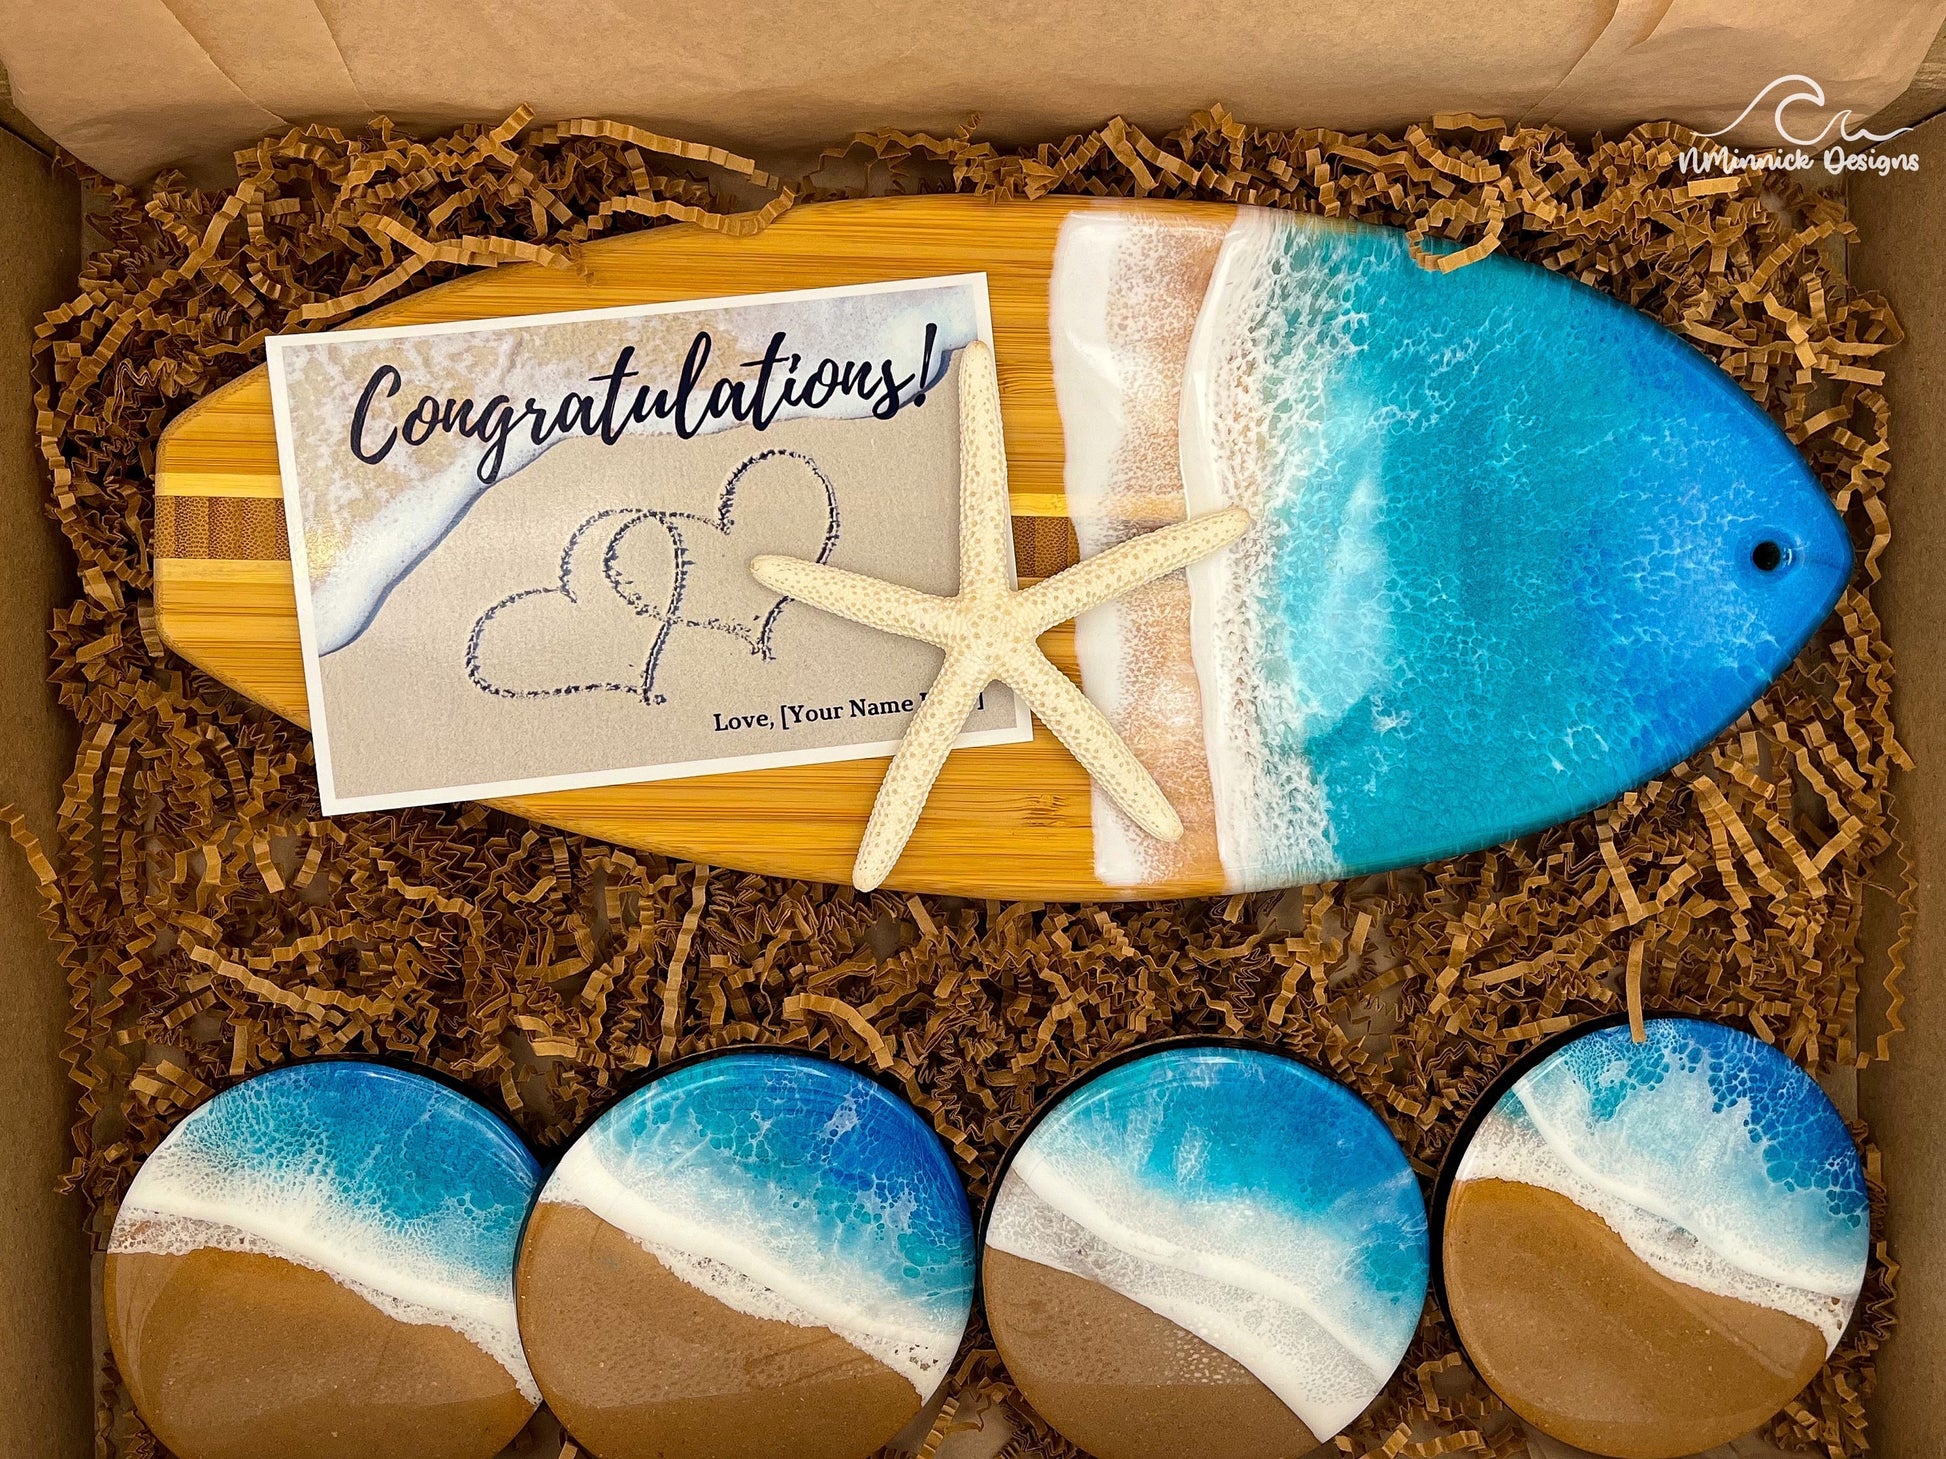 Surfboard-shaped bamboo charcuterie board.  Top portion covered in blue and teal ocean resin art resembling the waves of the ocean.  Four matching round blue and teal ocean resin drink coasters with real sand and cork backings.  Shown packaged in a kraft colored eco-friendly and plastic-free gift box and a free Congratulations card.